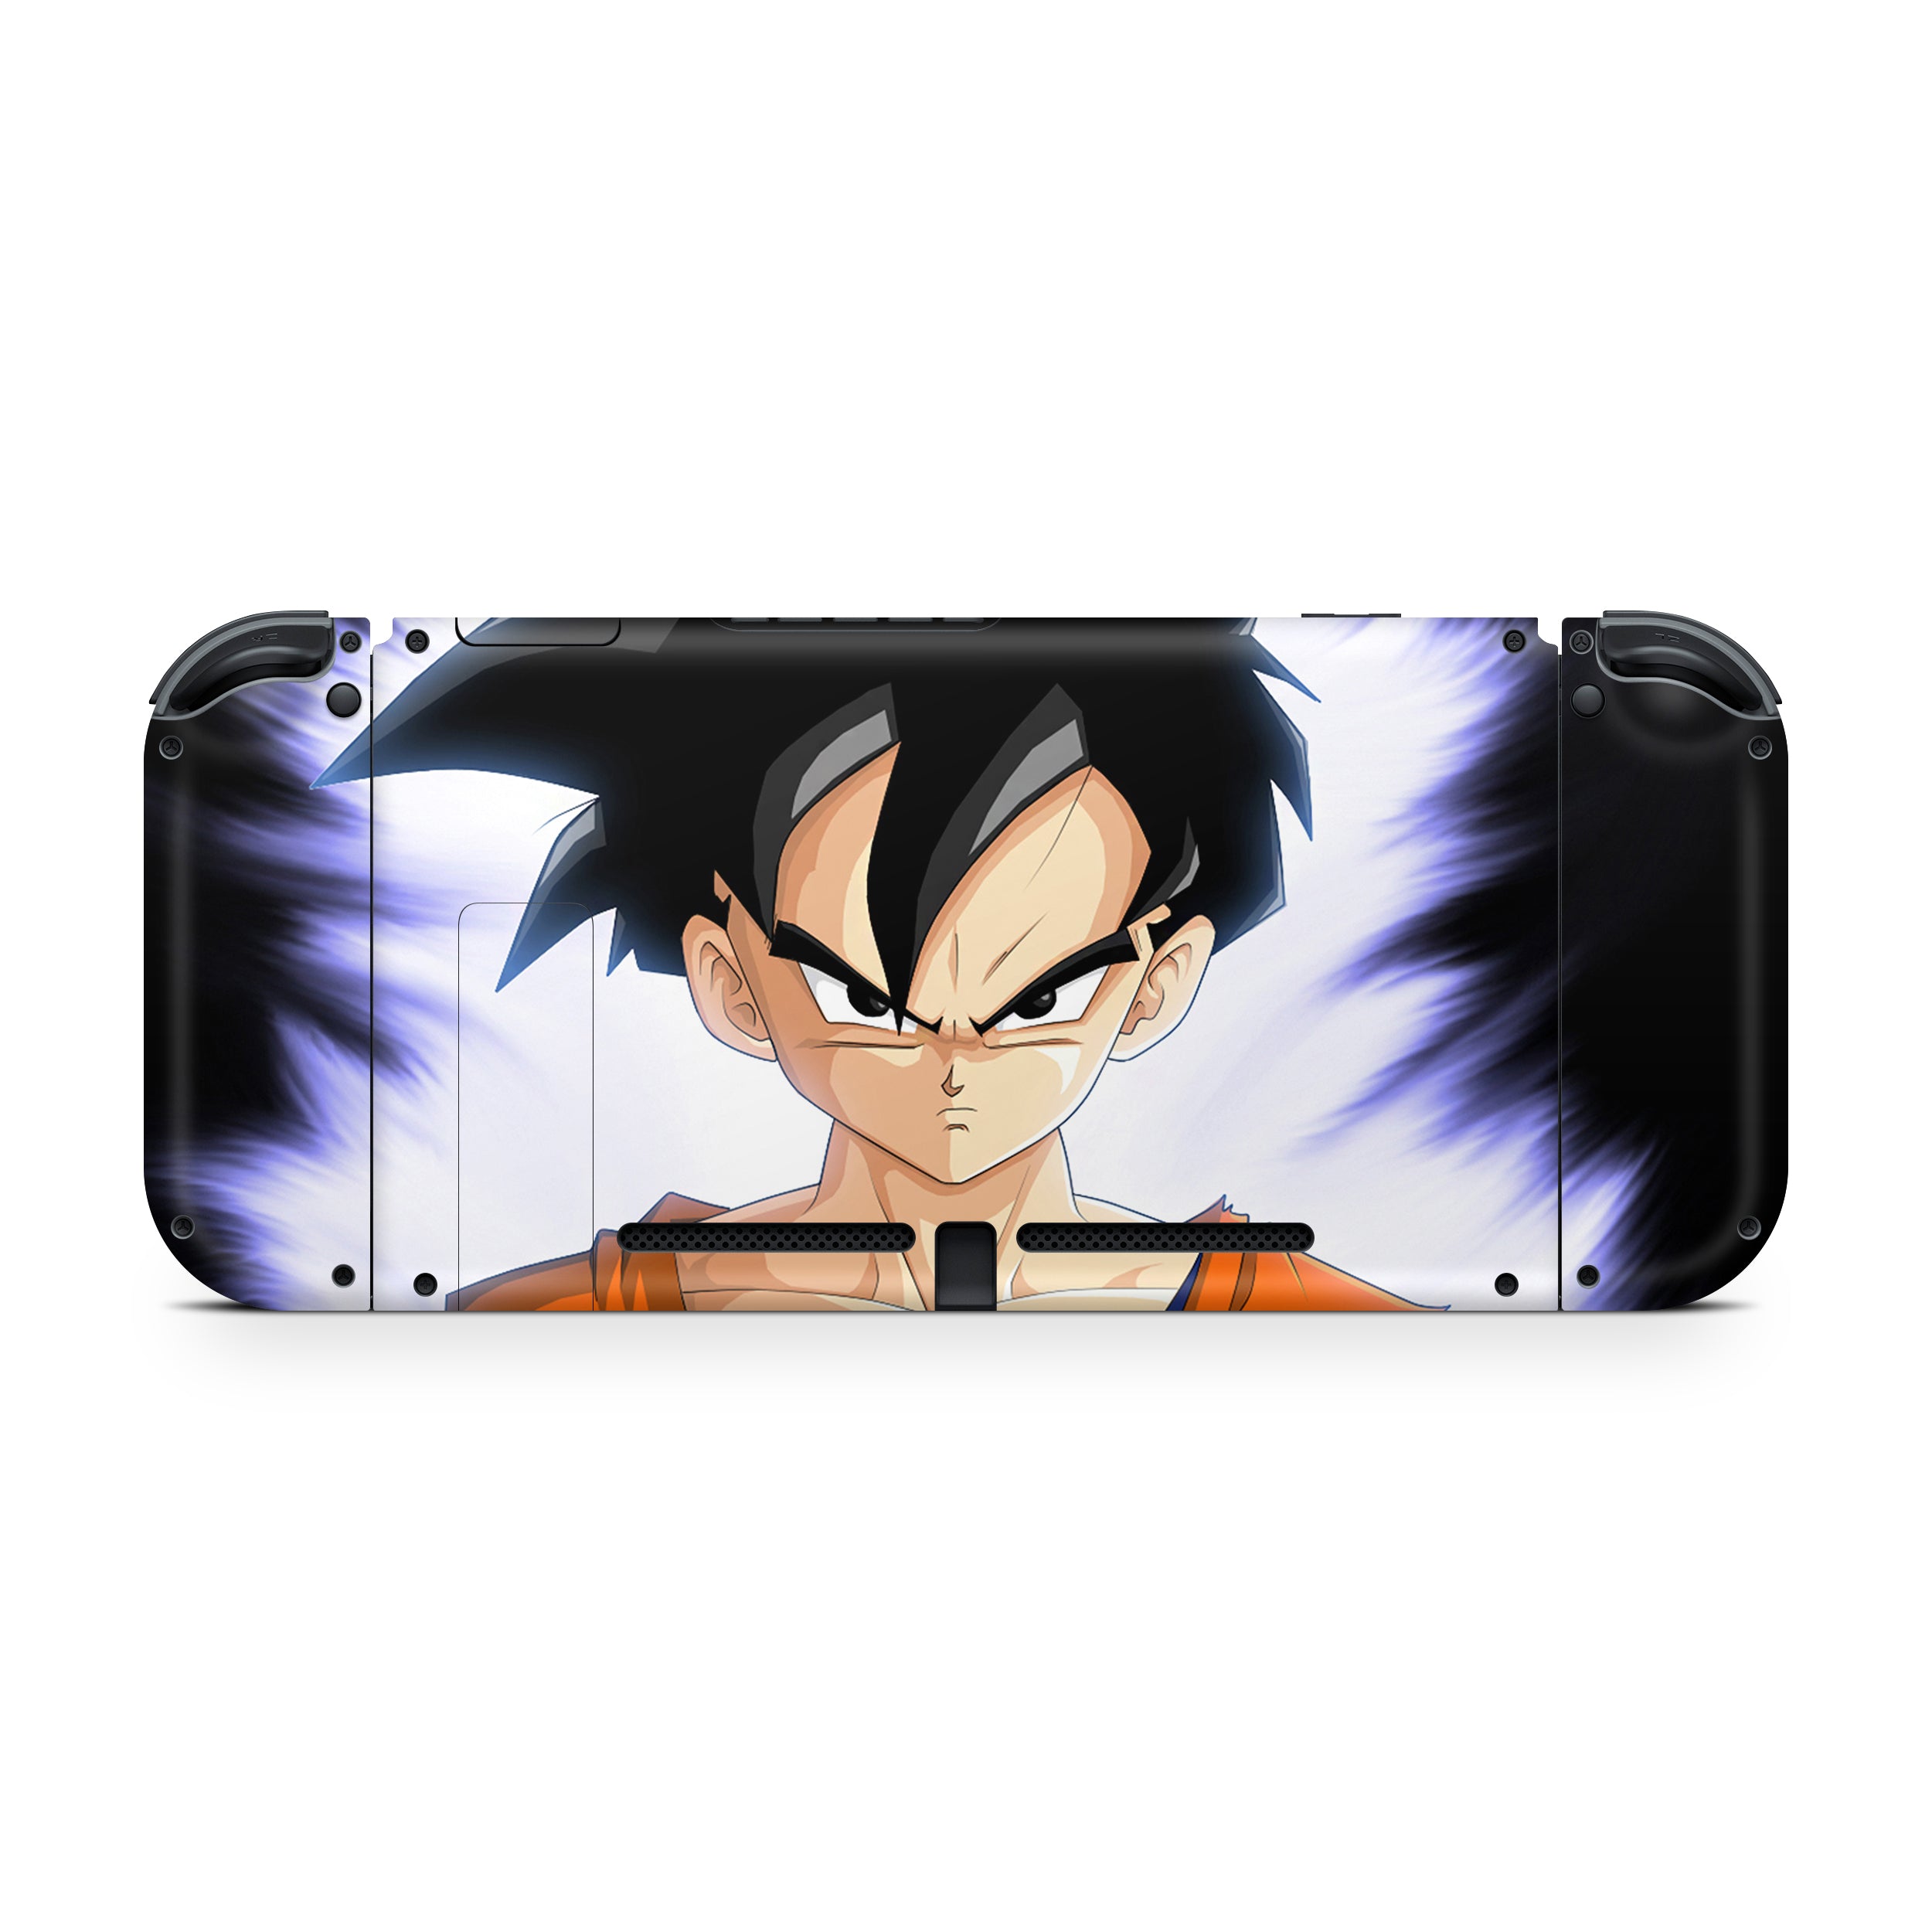 A video game skin featuring a Dragon Ball Z Gohan design for the Nintendo Switch.